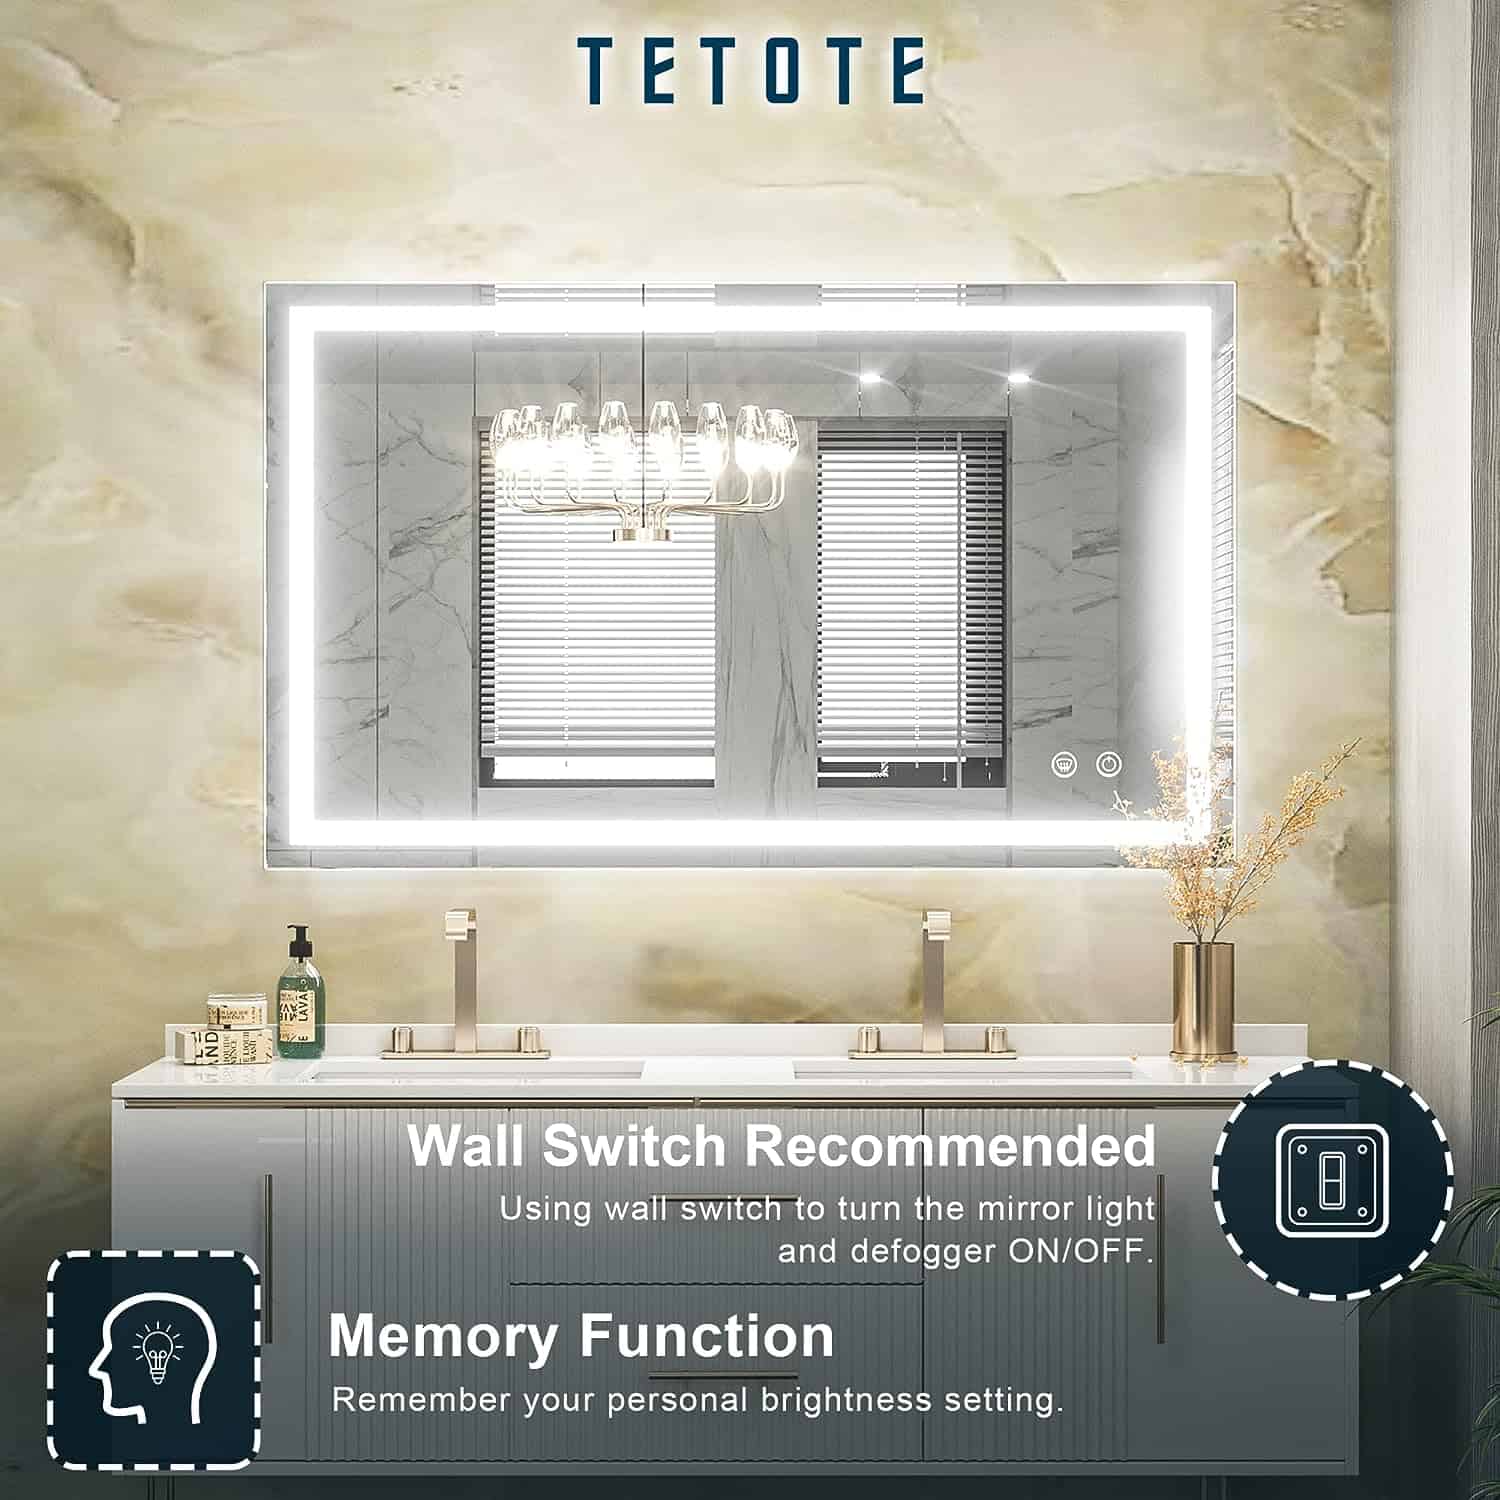 LED Mirror40 x 24″ Bathroom Vanity Mirror Illuminated Mirror with Lights on a marbled wall, featuring icons suggesting a wall switch and a memory function for brightness and defogger settings.